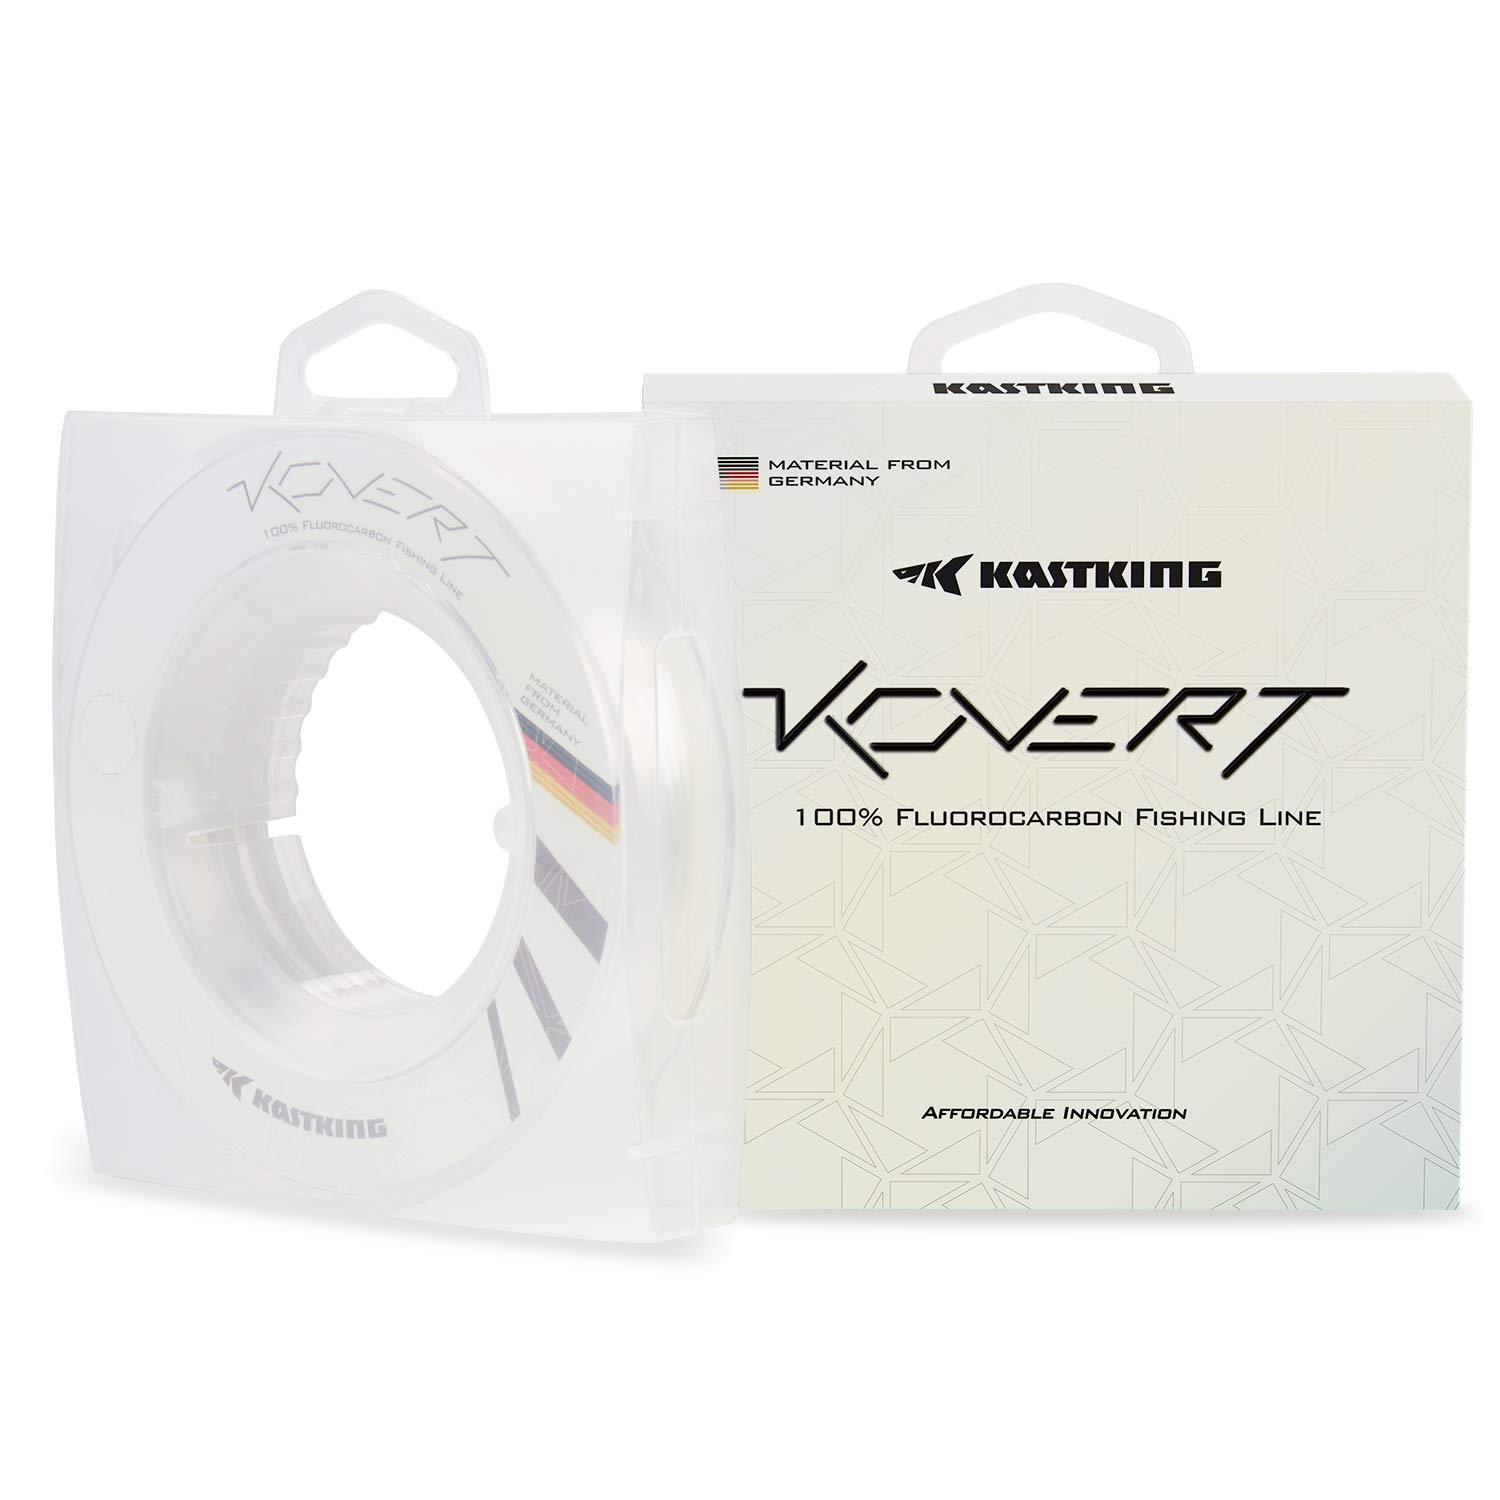 The Best Fishing Leader Line For Your Money (Fluorocarbon